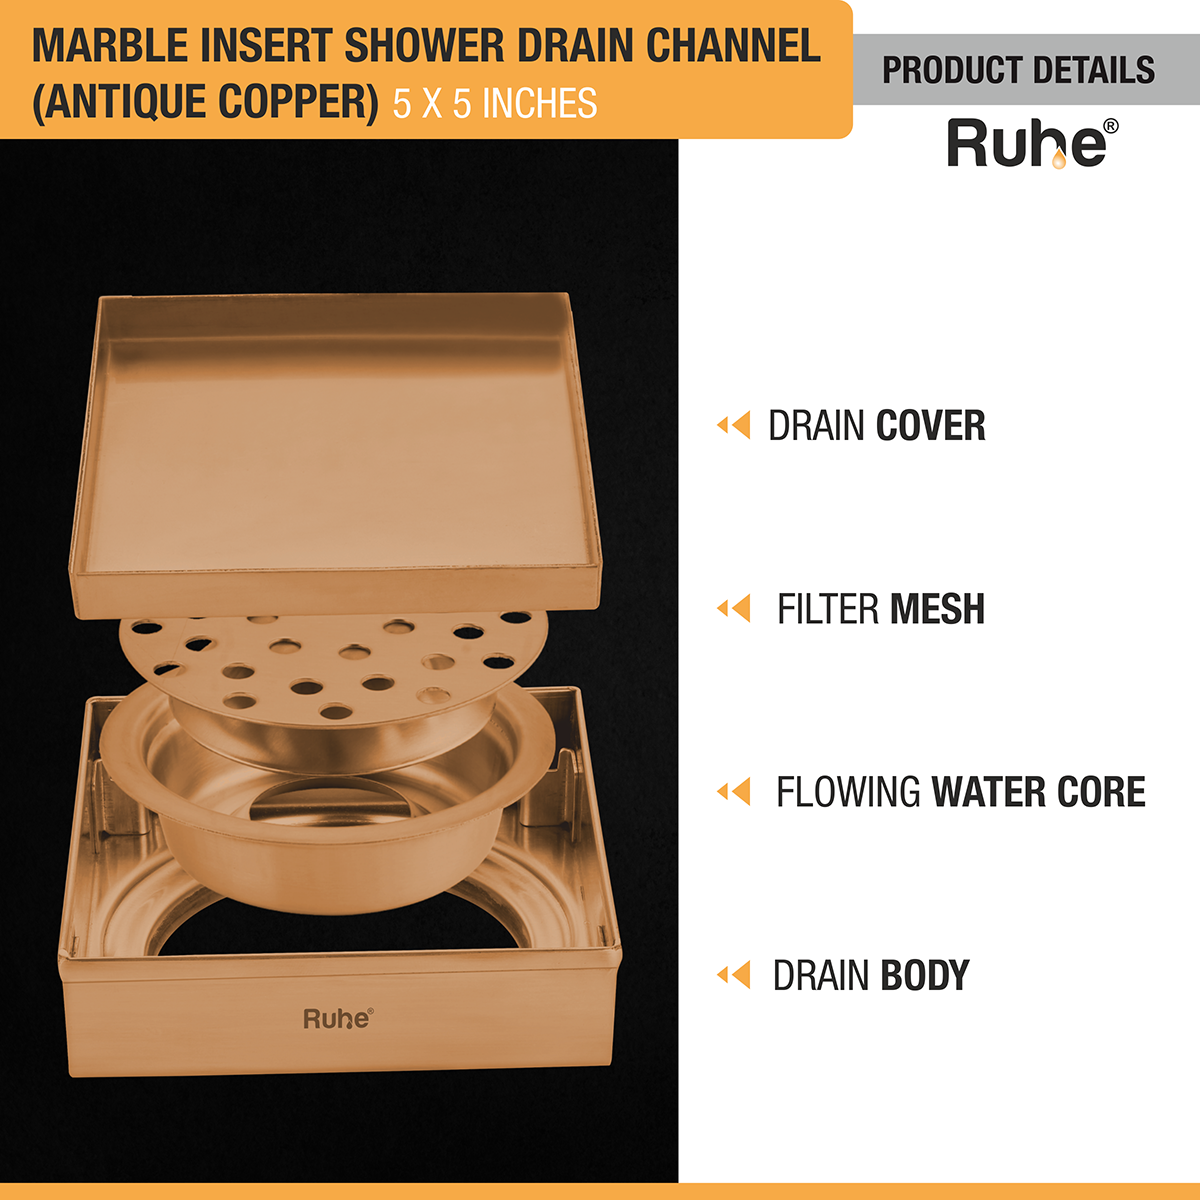 Marble Insert Shower Drain Channel (5 x 5 Inches) ROSE GOLD/ ANTIQUE COPPER product details